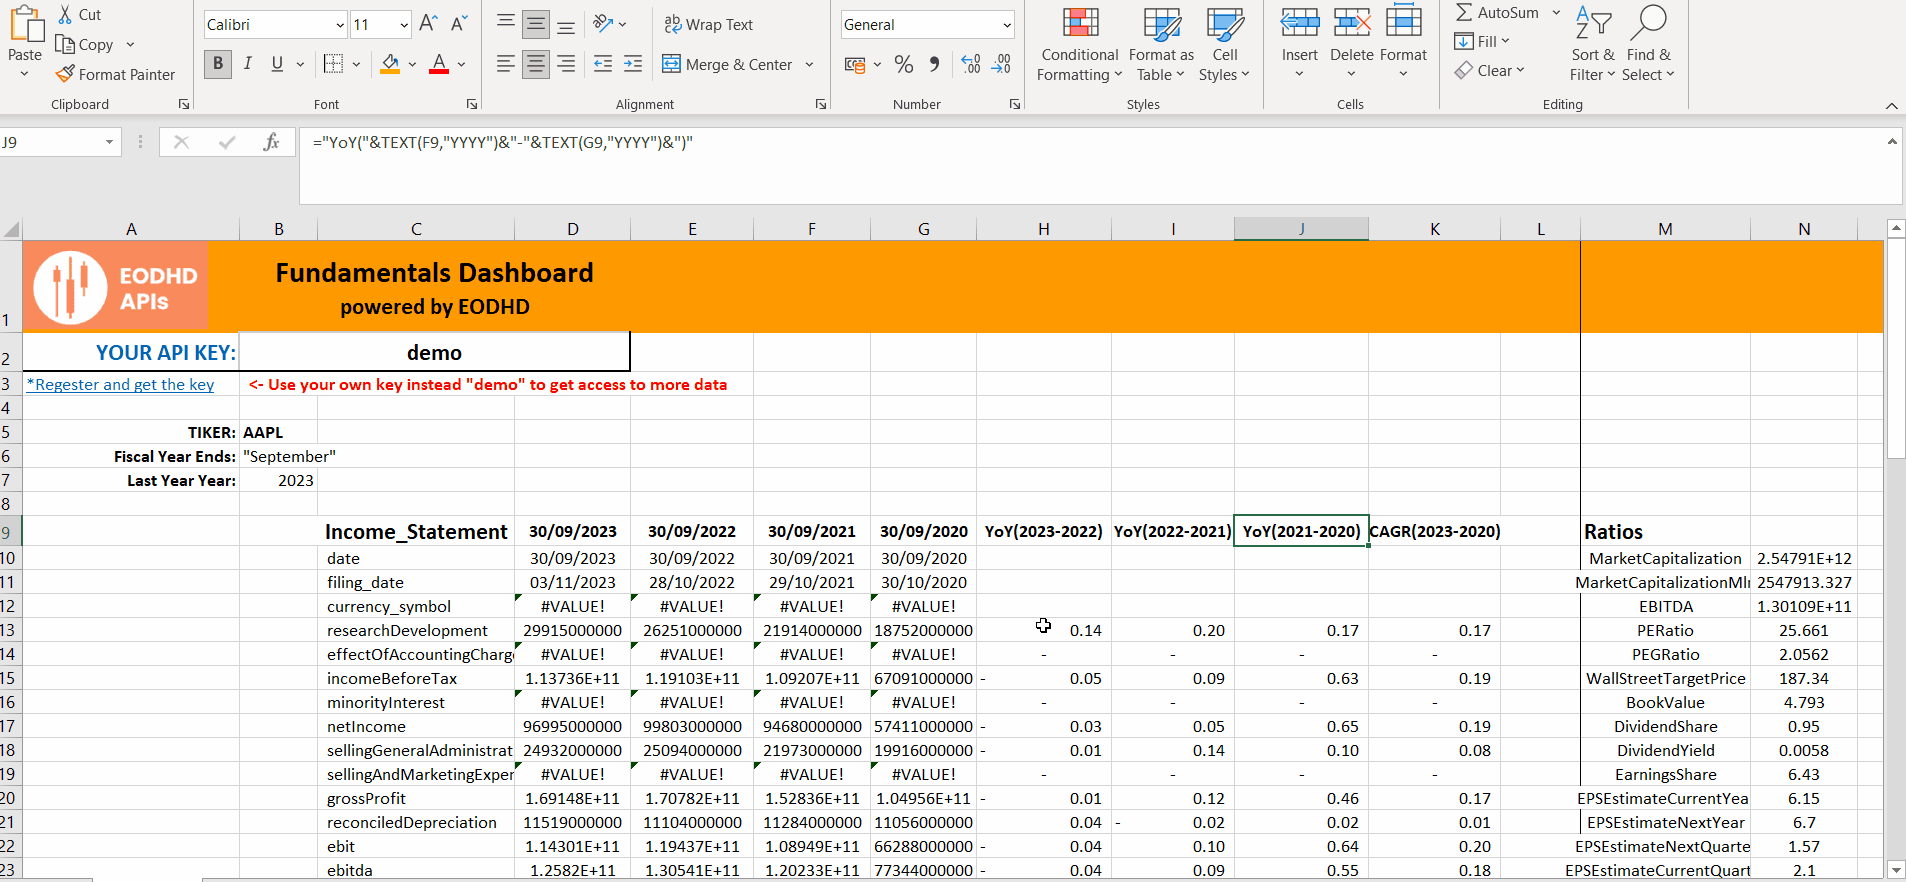 Excel Financial Statement Analysis Formating